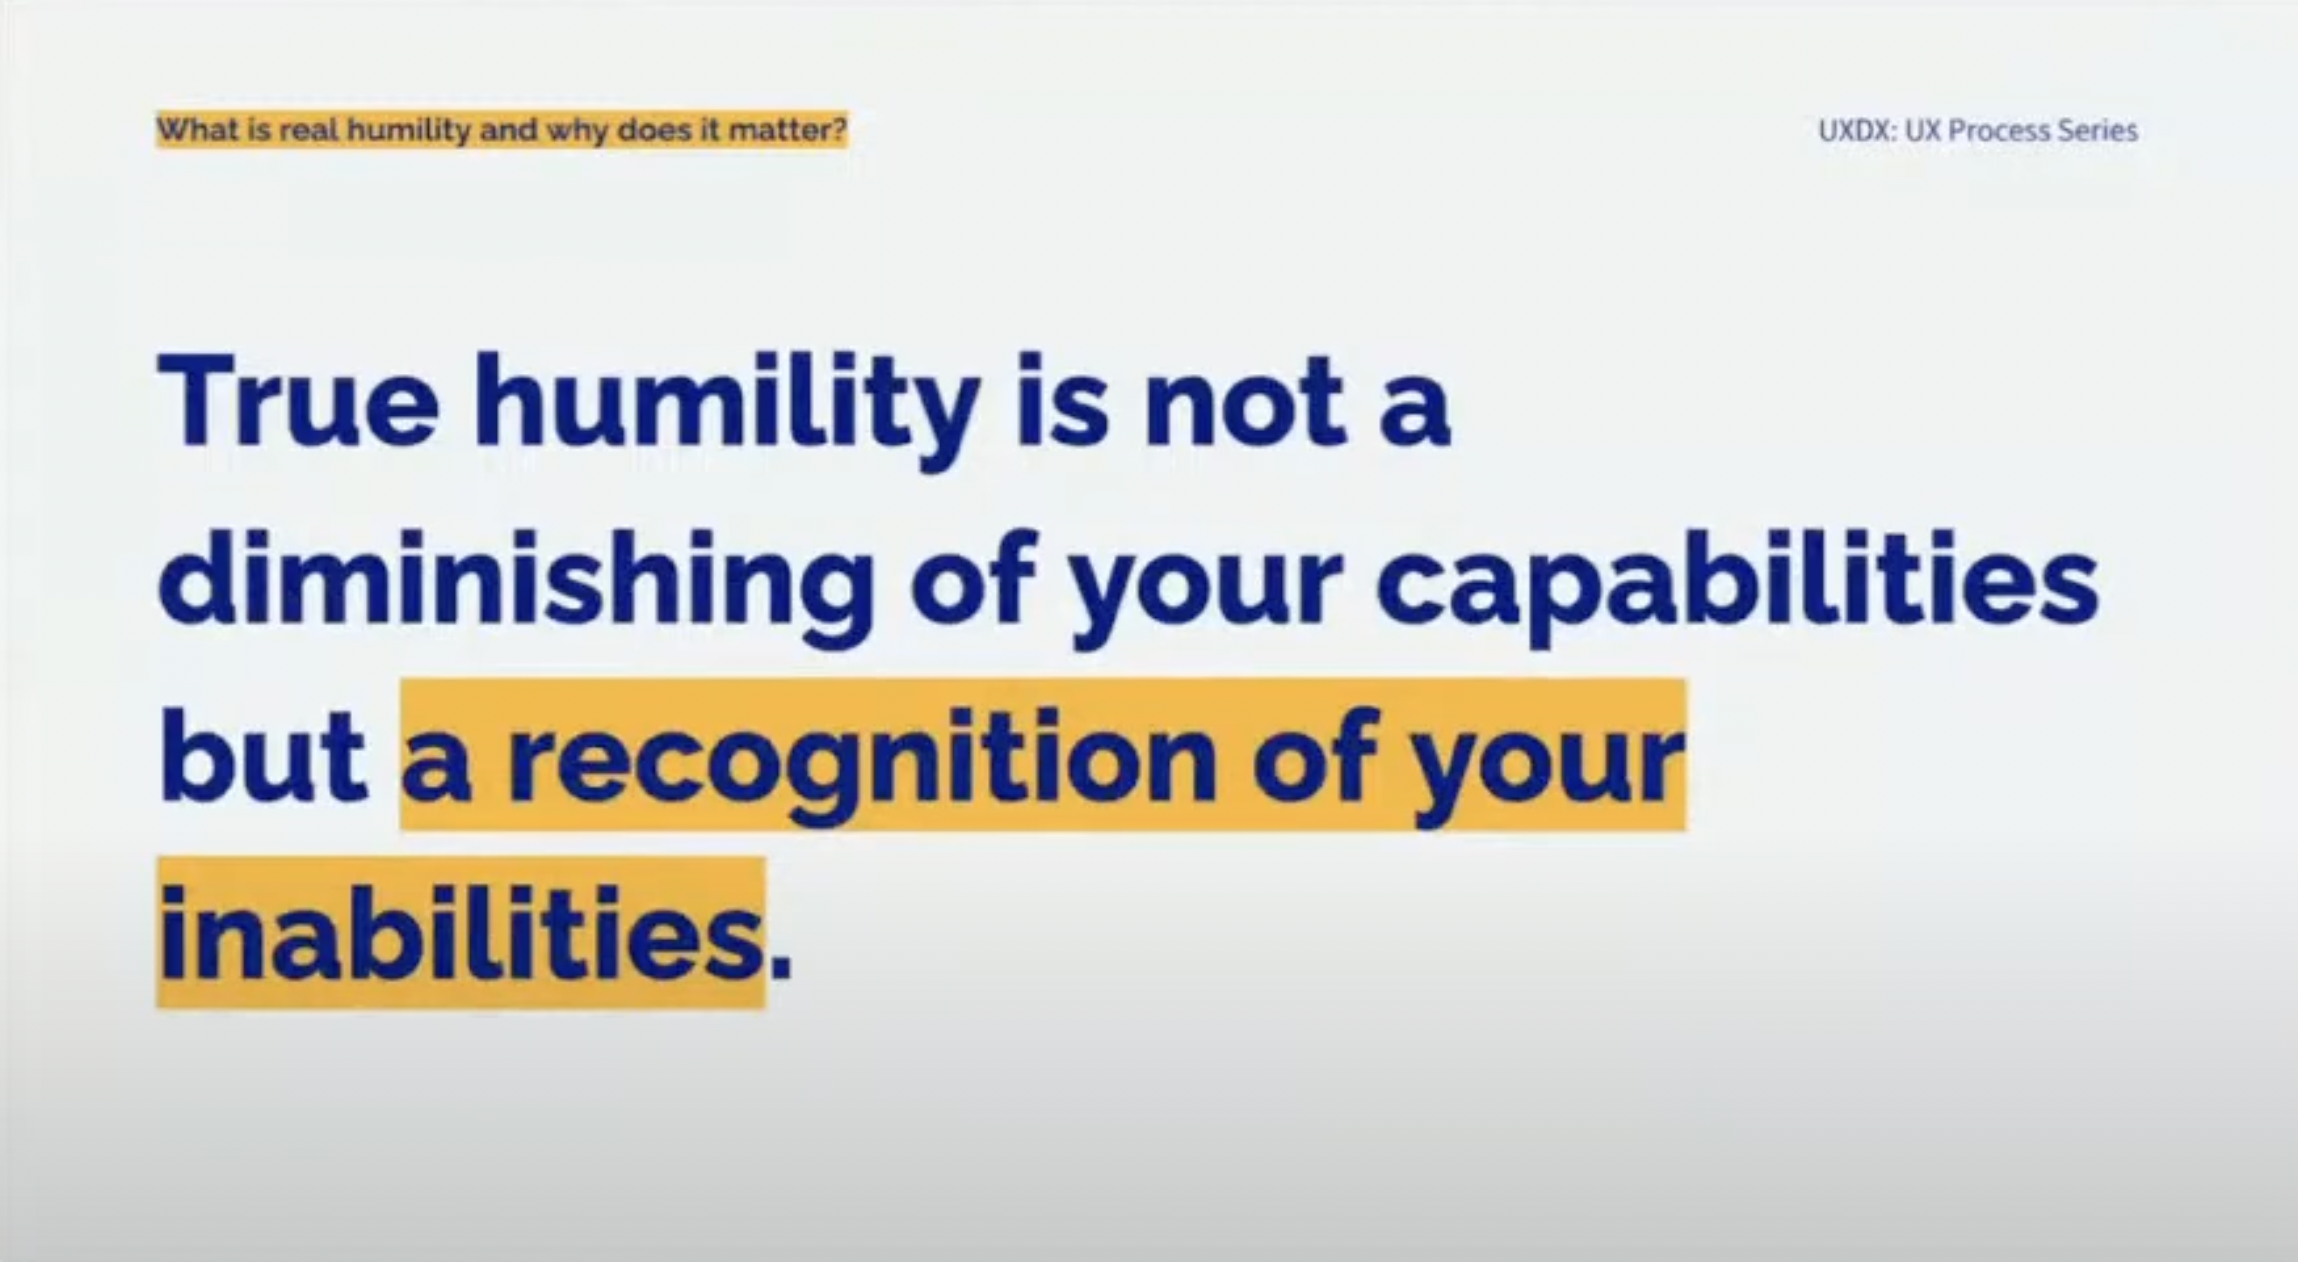 True humility is not a diminishing of your capabilities but a recognition of your inabilities.